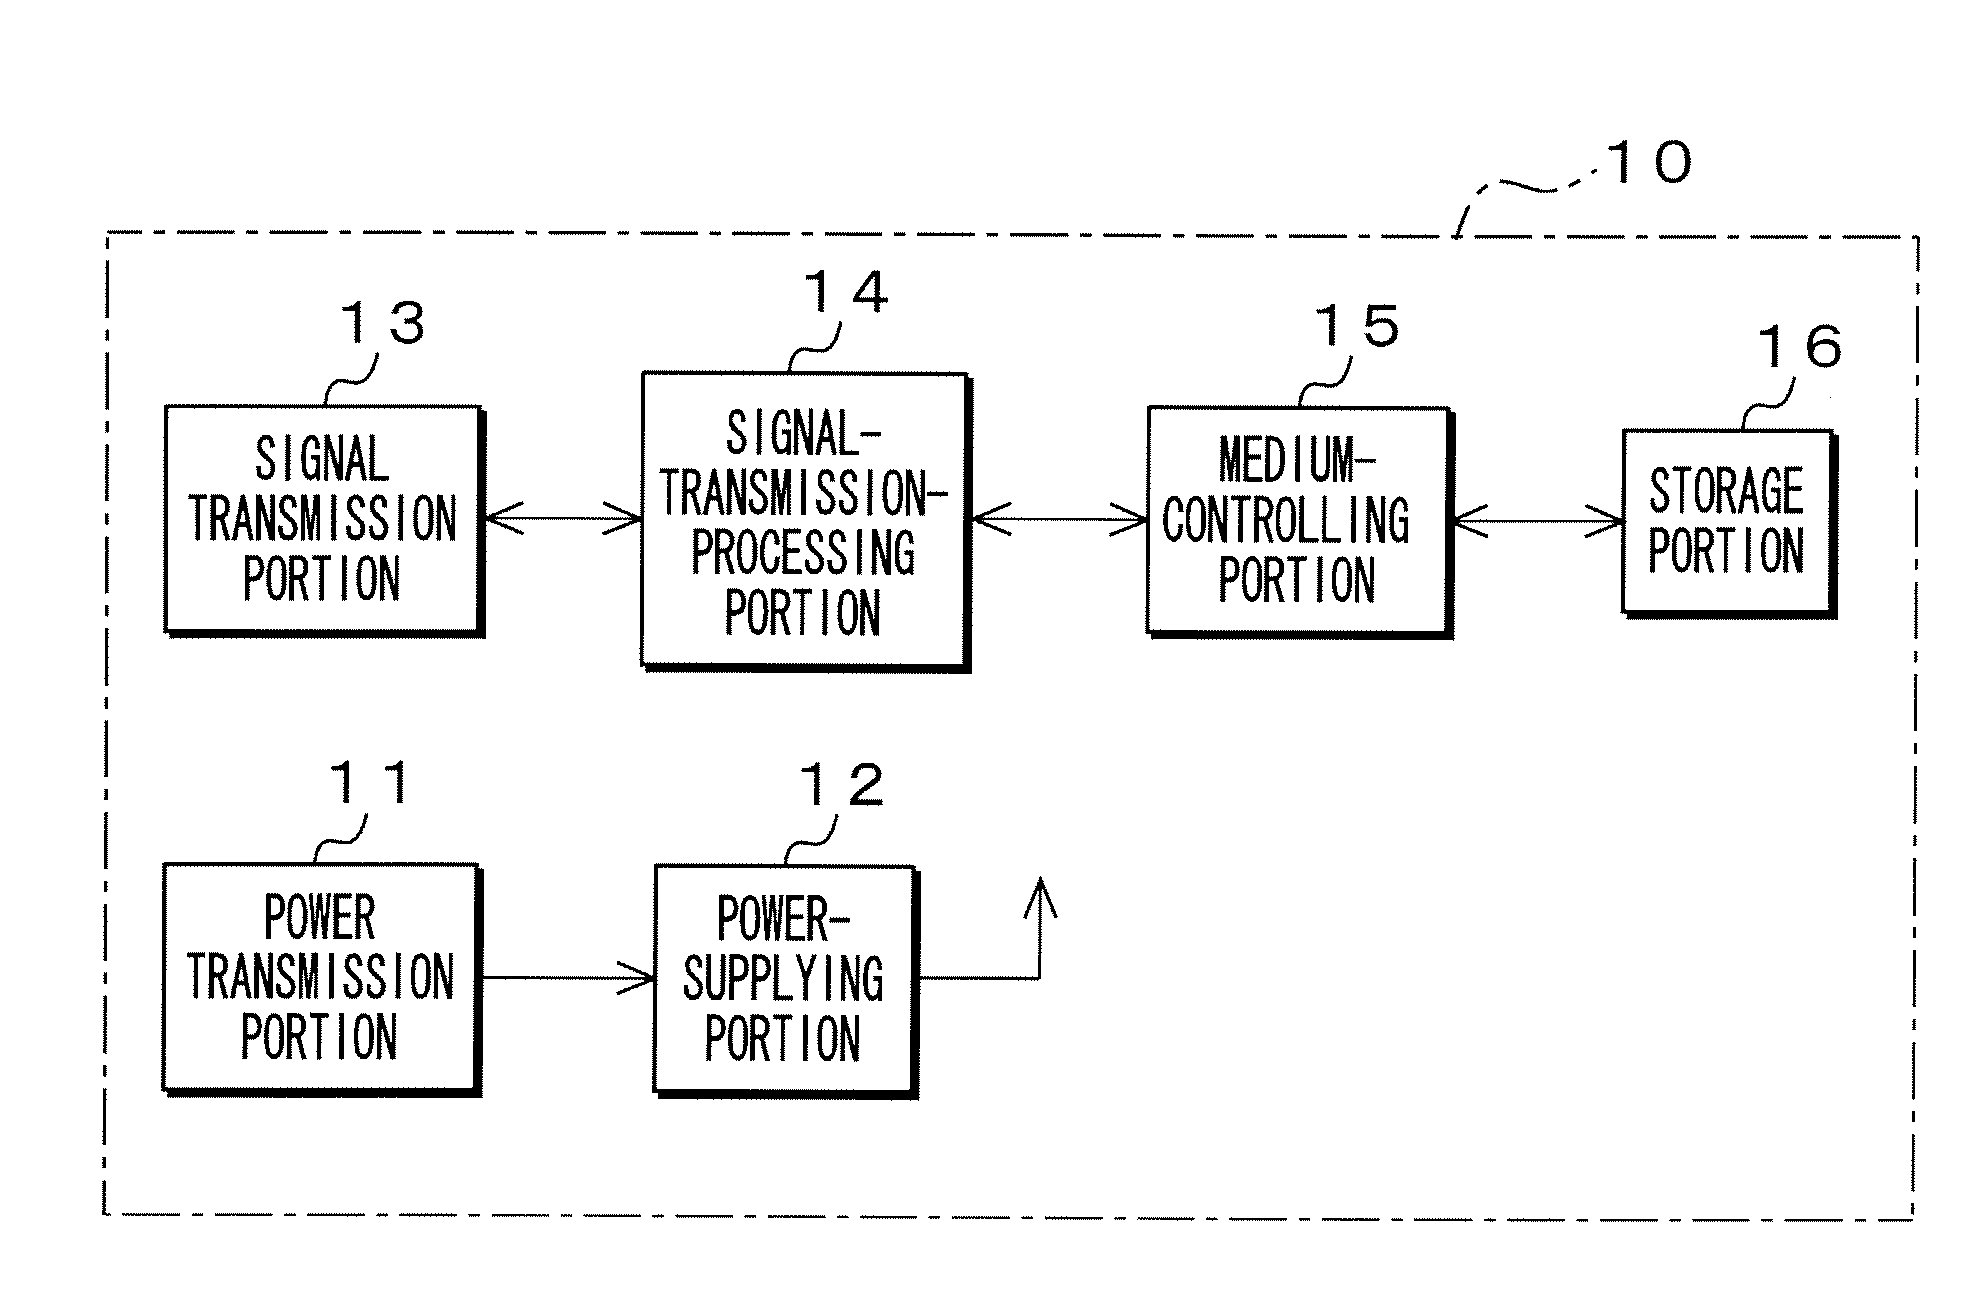 Recording medium and apparatus for holding the same